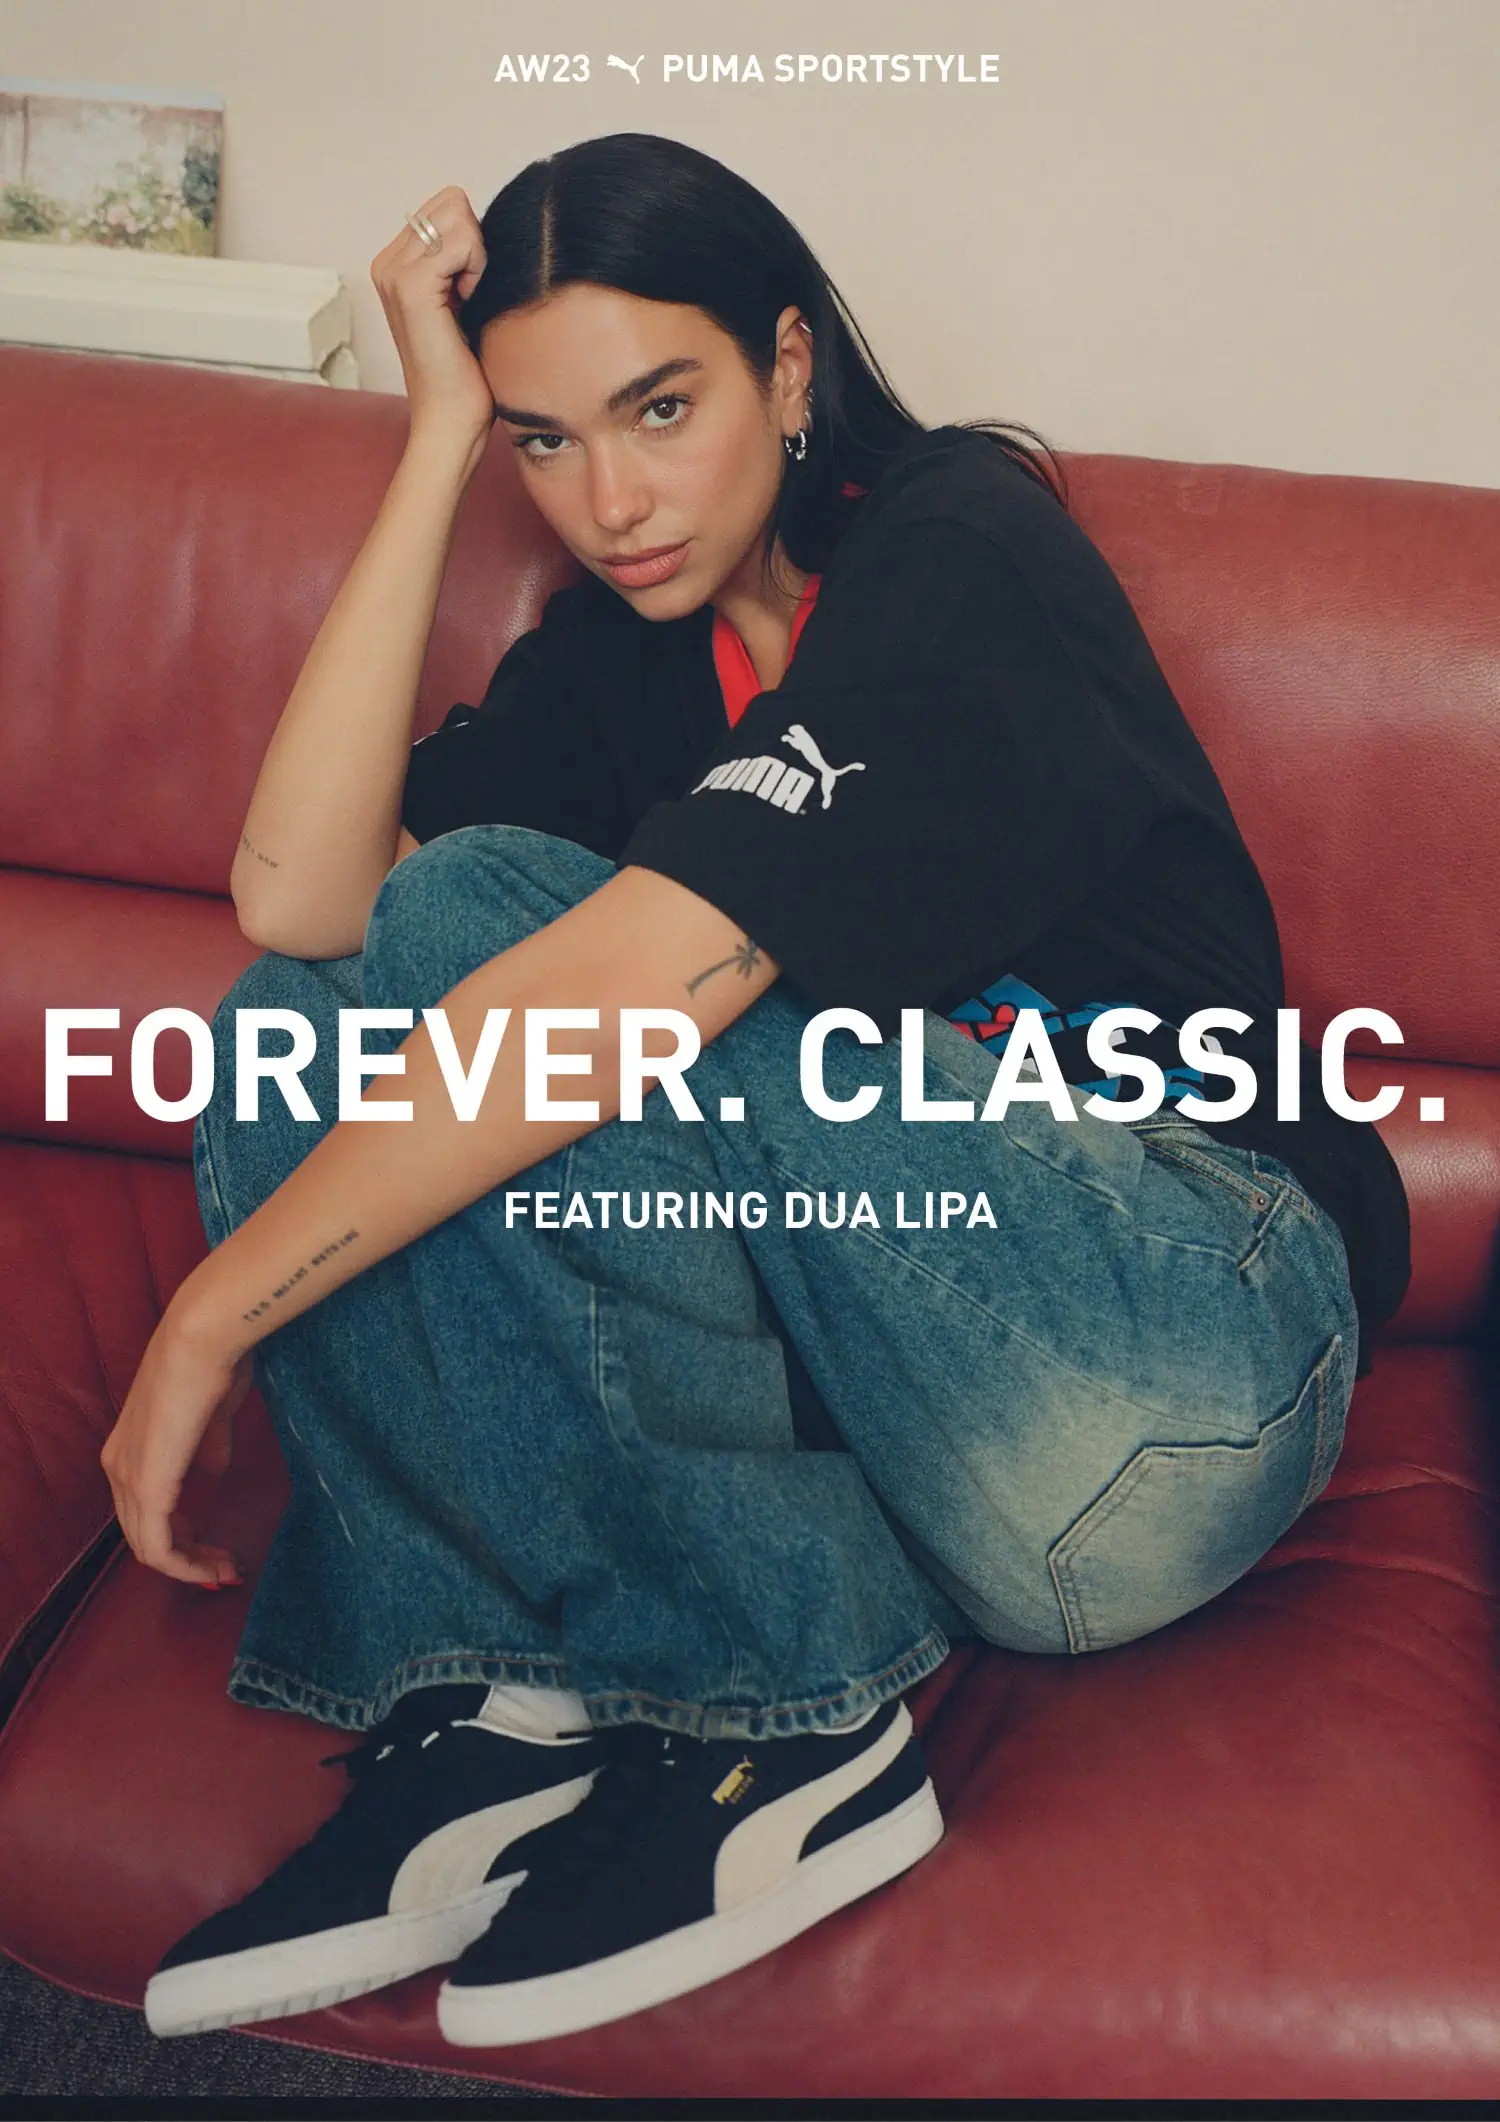 Dua Lipa curates from the Puma archive for the unveiling of the new ''Forever.Classic.'' lookbook